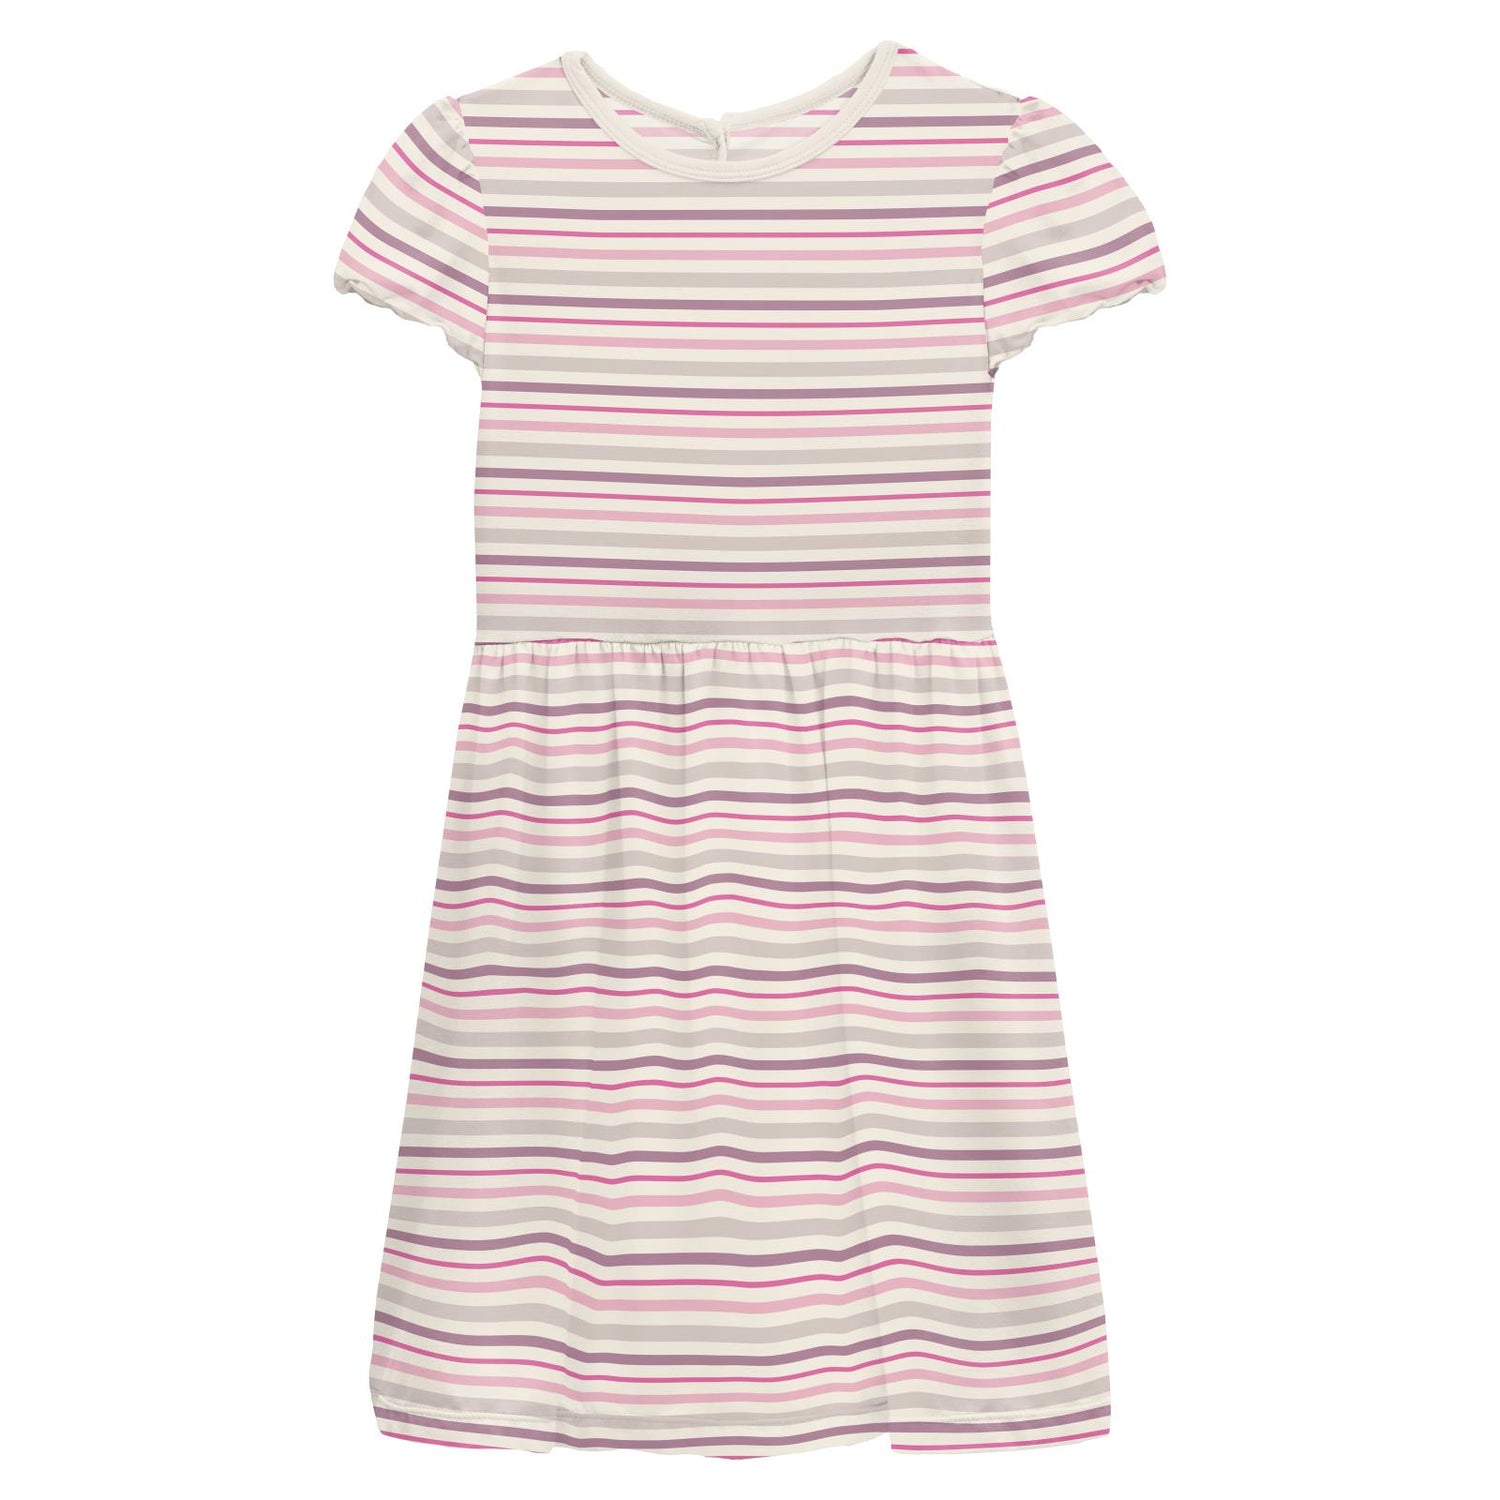 Print Flutter Sleeve Twirl Dress with Pockets in Whimsical Stripe